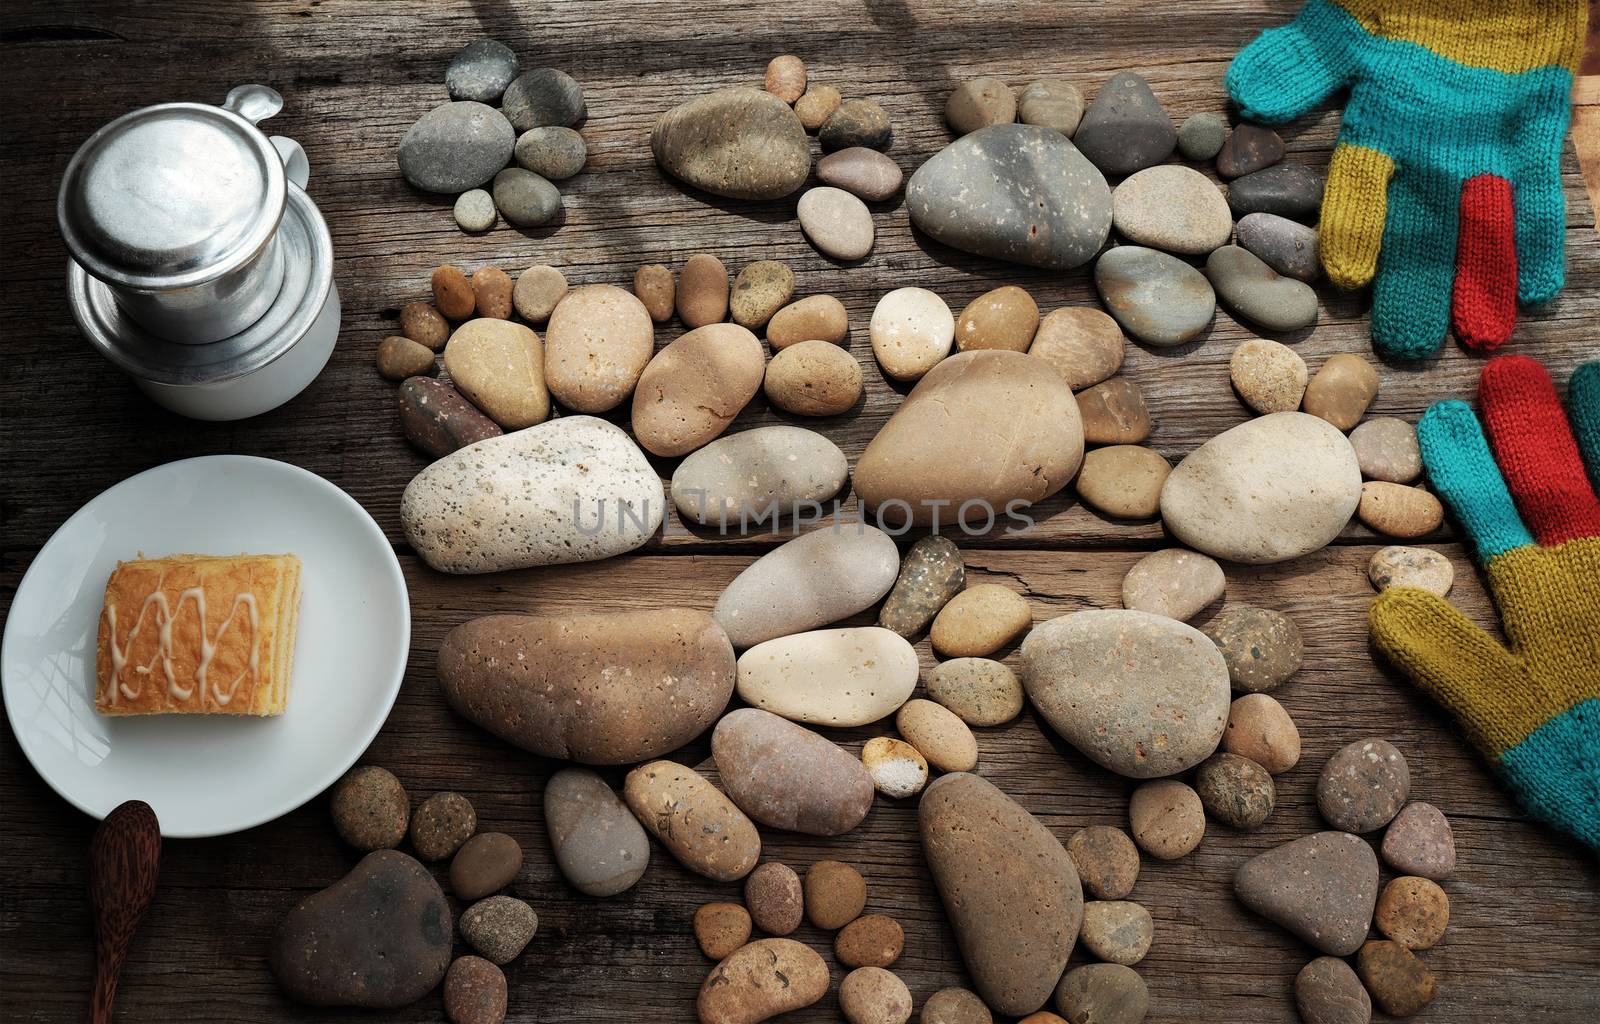 Relax morning for new day with coffee time in cafeteria, abstract cafe interior with table near glass window, pebbles background make group of foot, romantic view for breakfast in vintage color